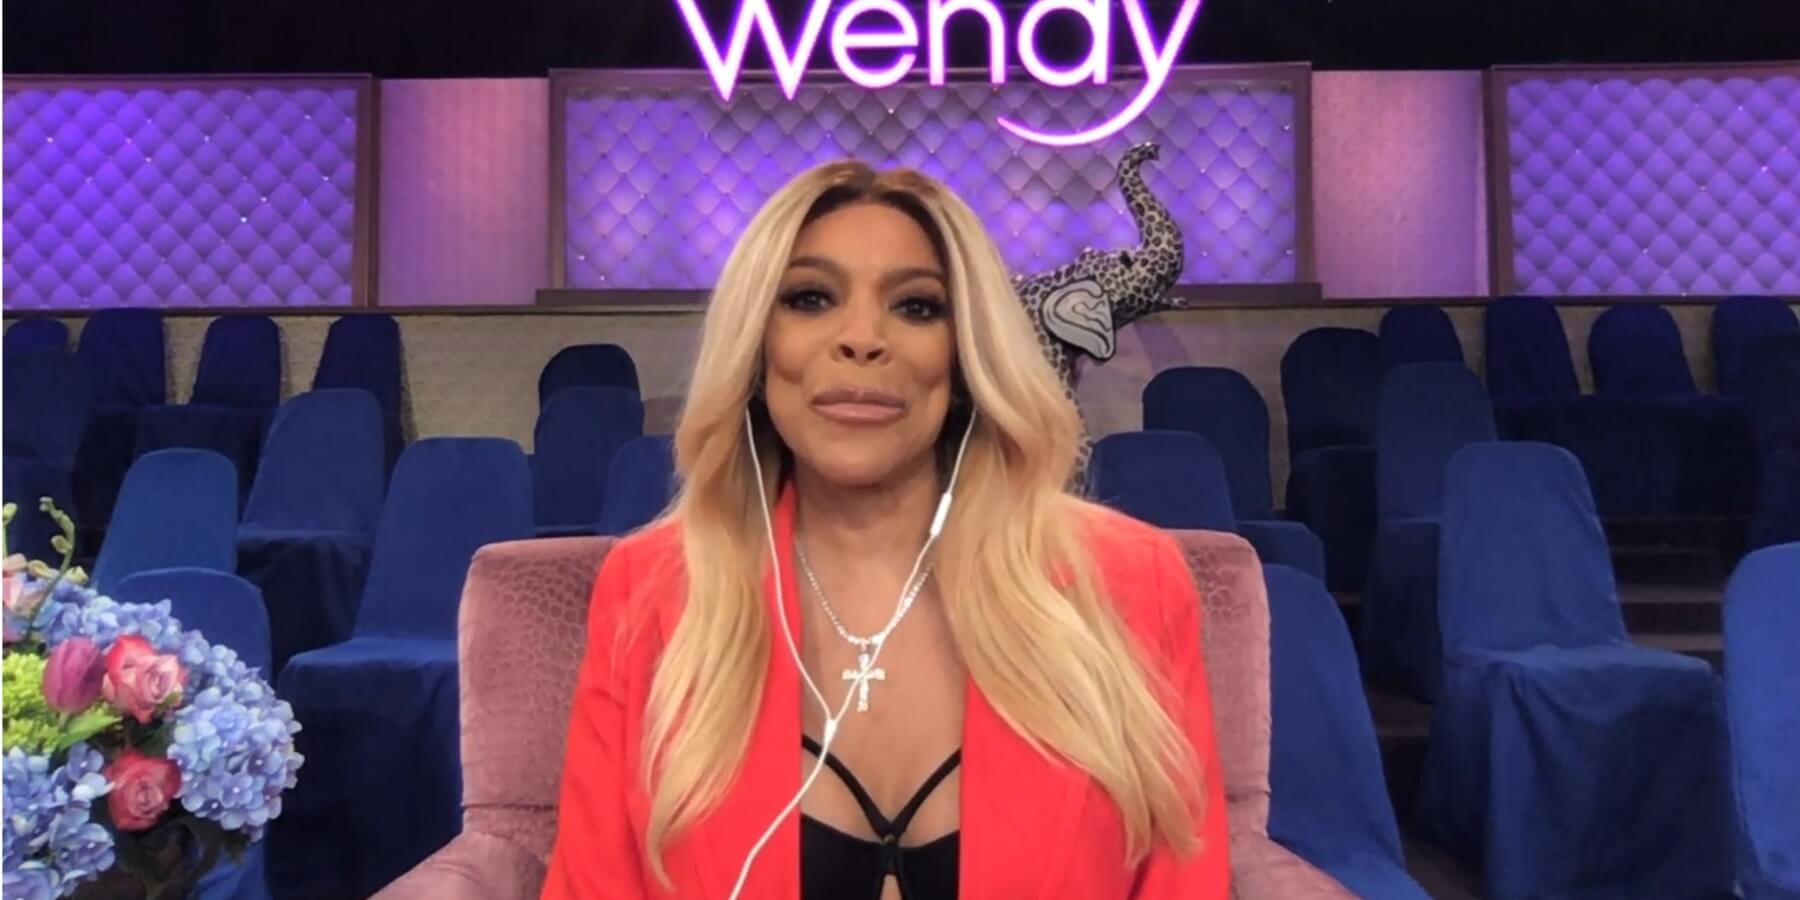 Wendy Williams on the set of the 'Wendy' Show